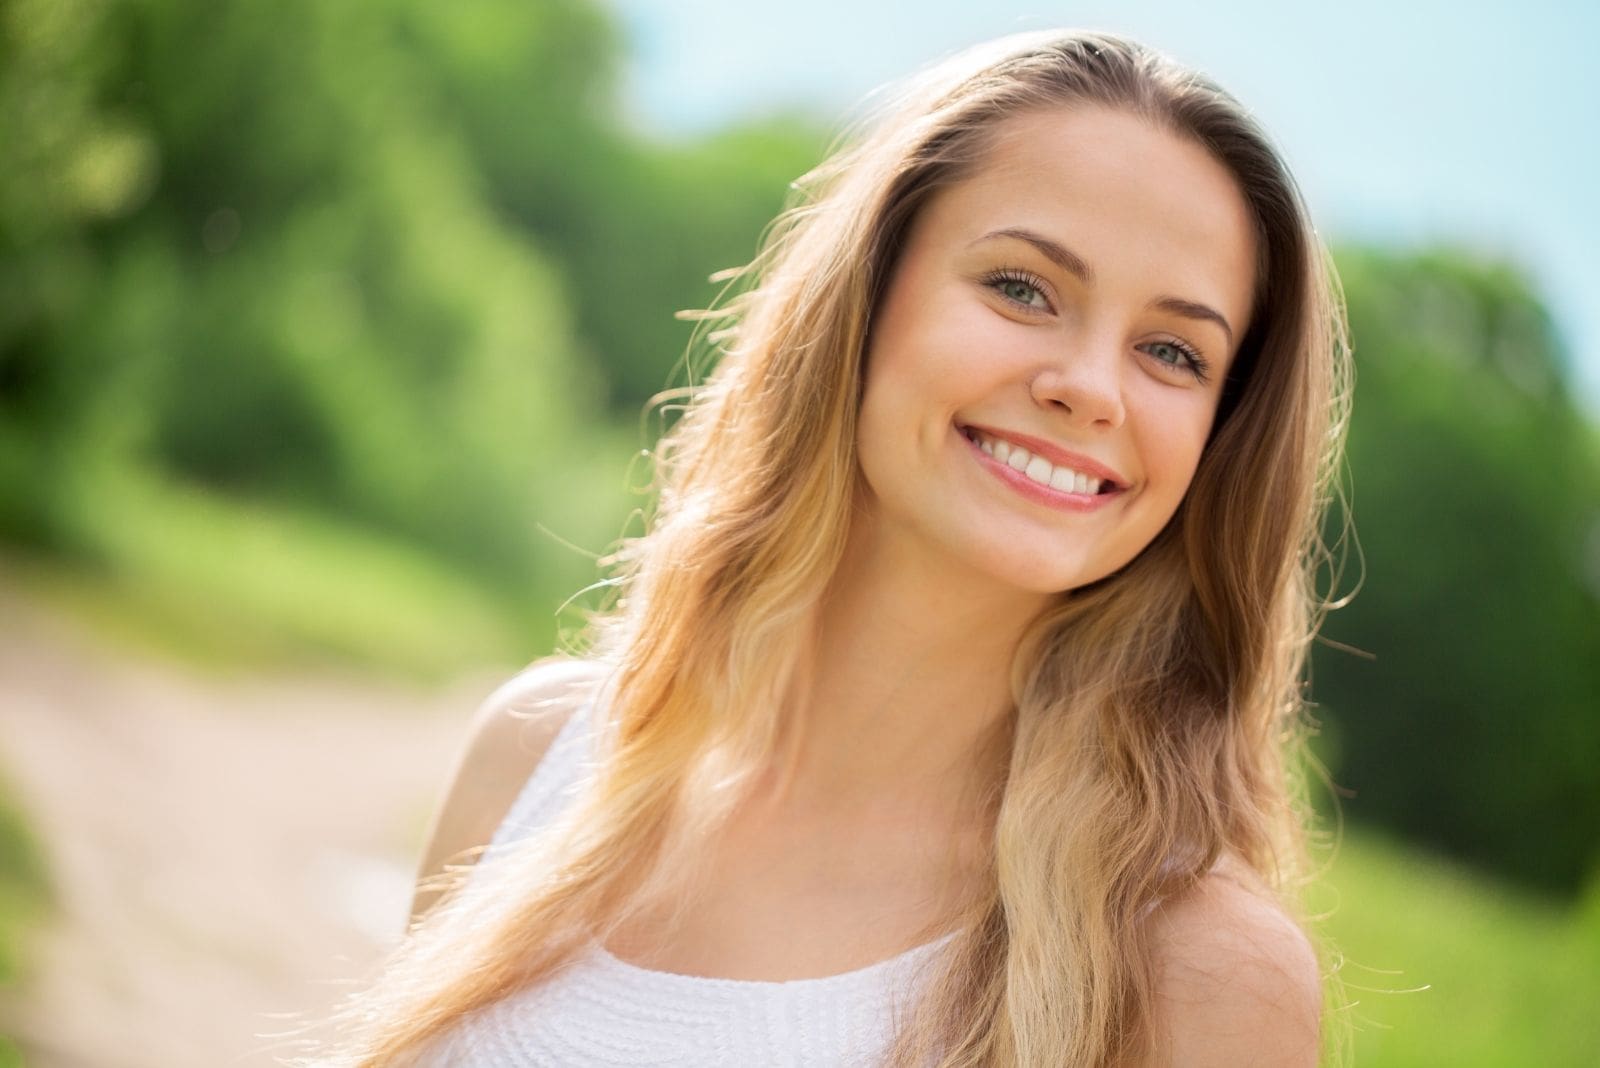 smiling woman outdoors wearing simple white top